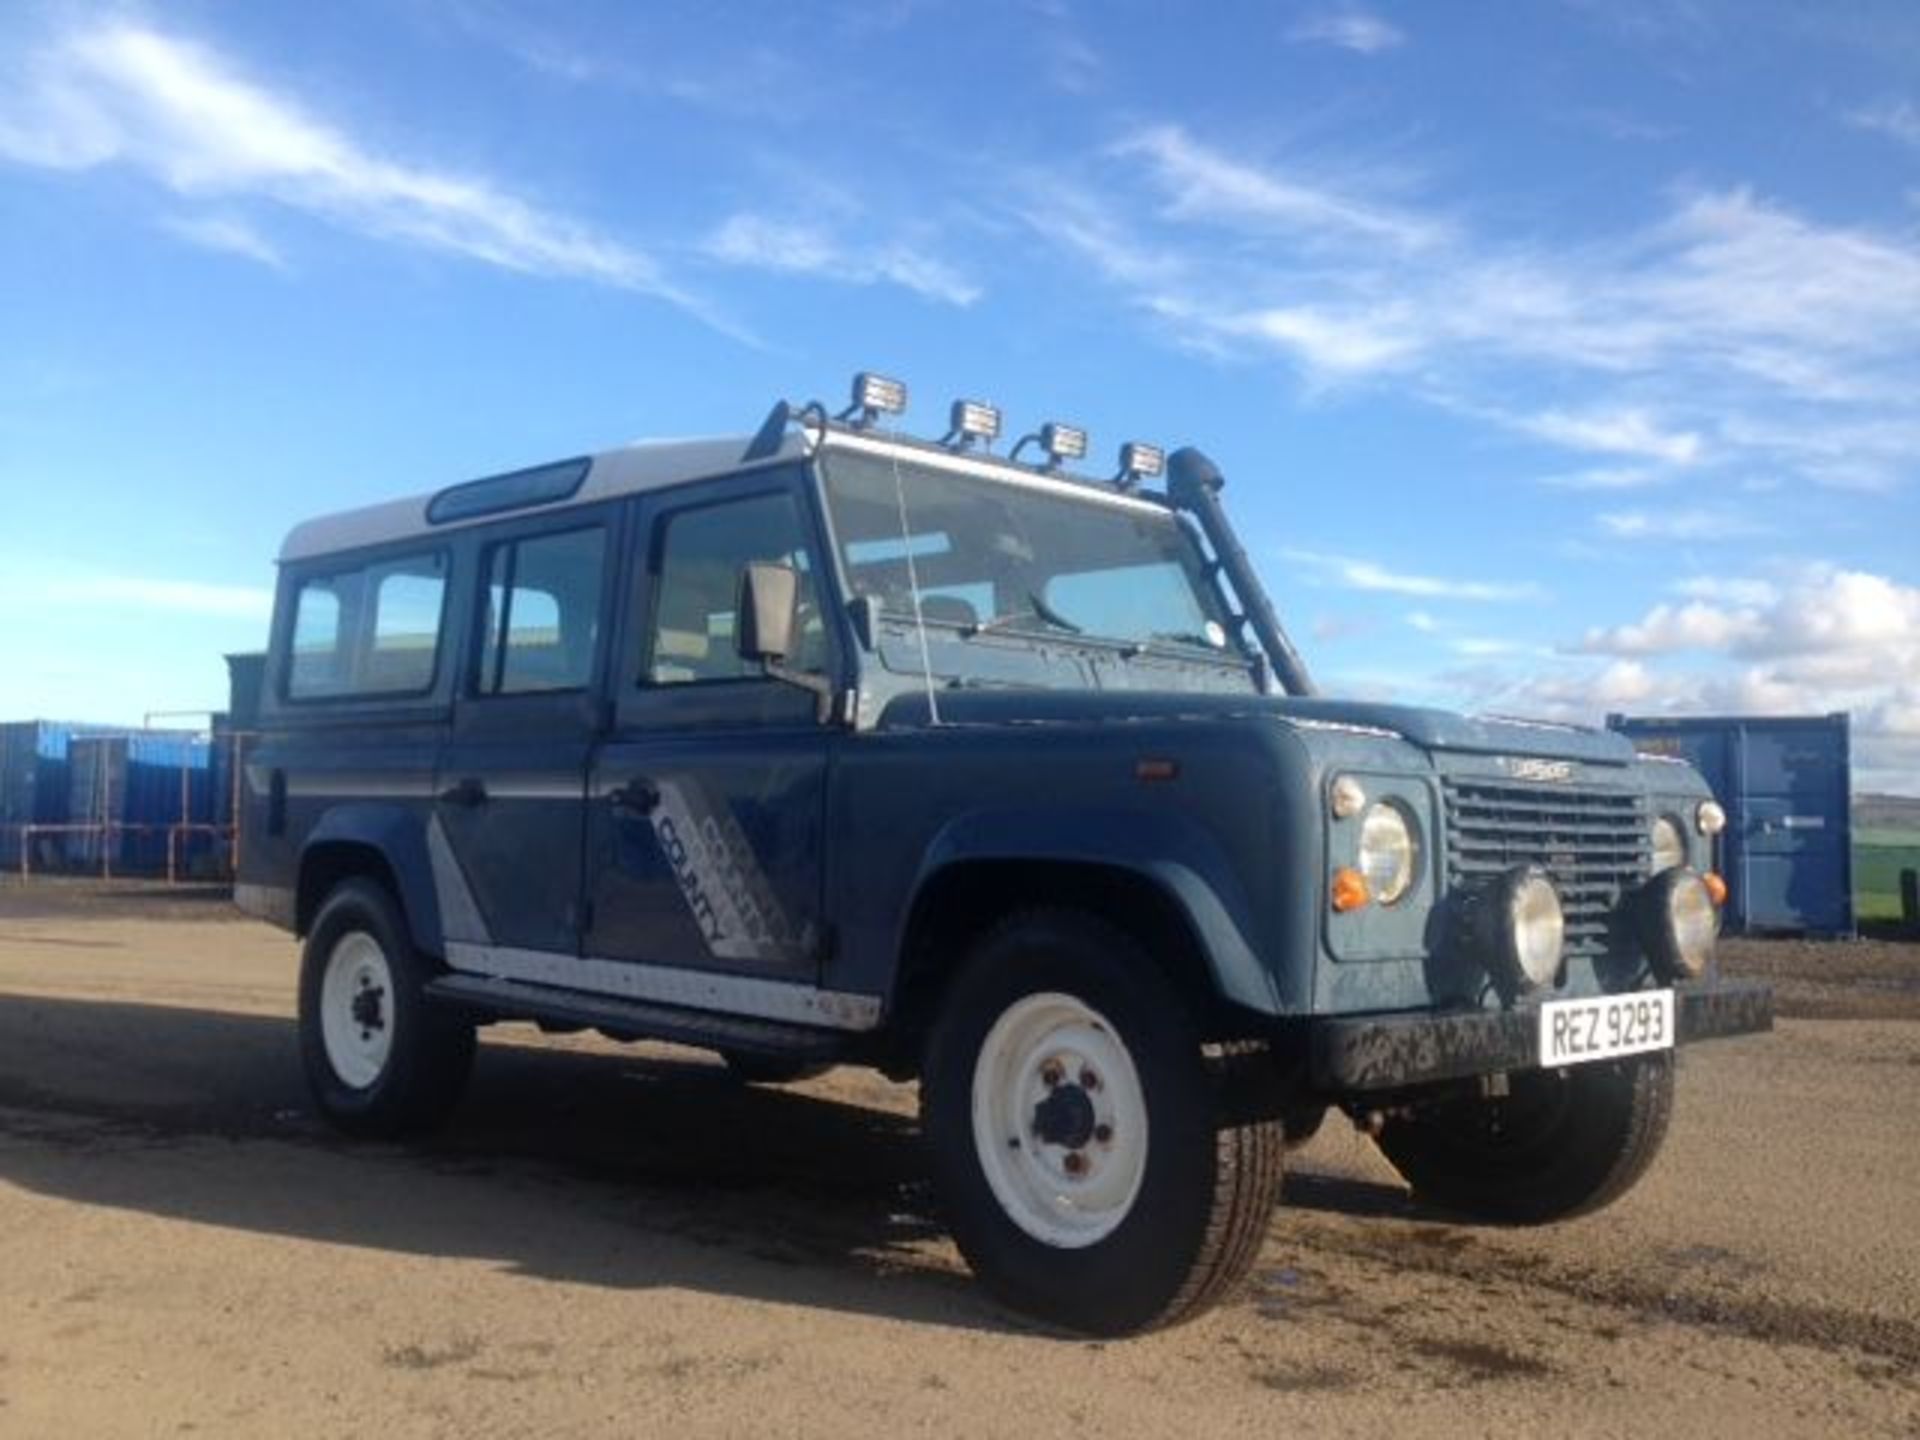 LAND ROVER 110 4C COUNTY D TURBO - 2495cc - Image 3 of 8